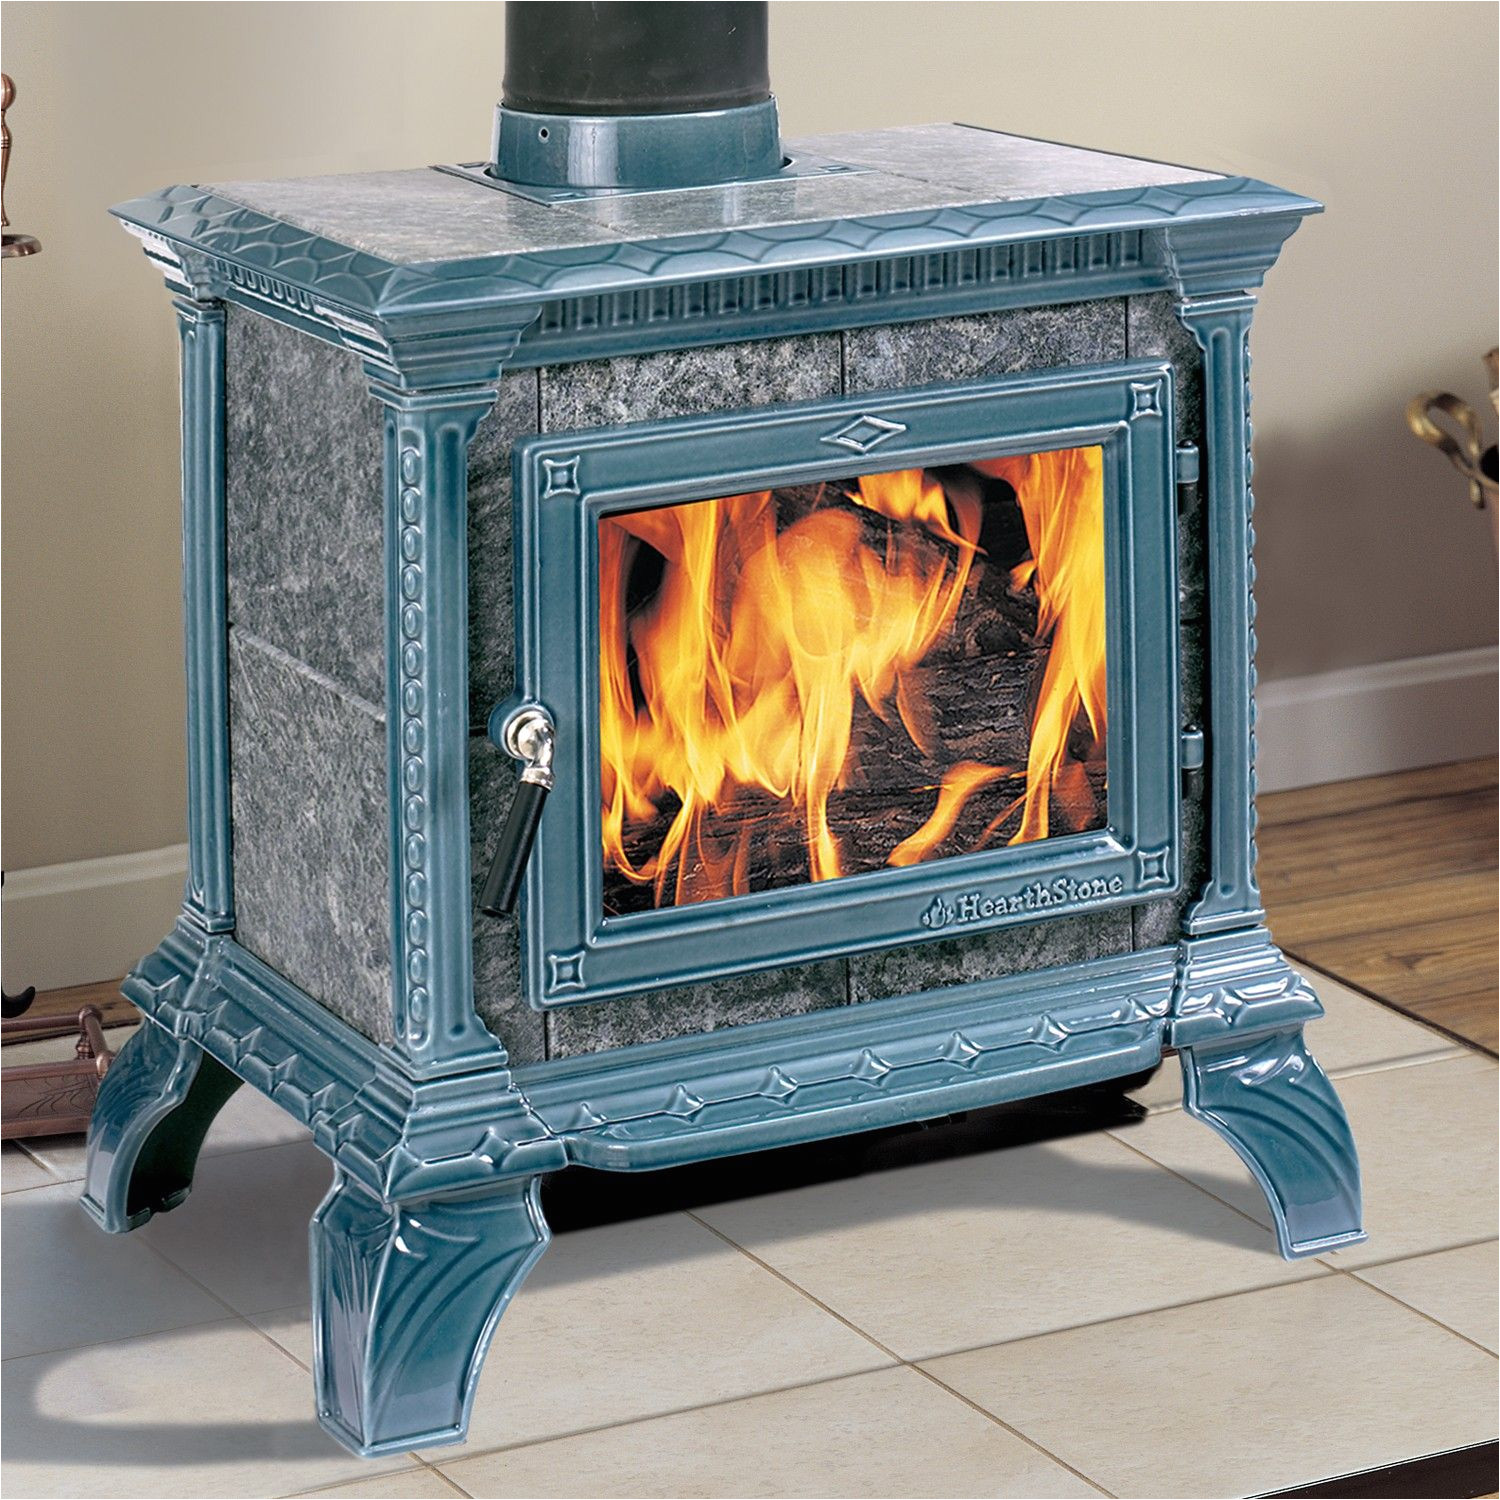 the tribute is designed to satisfy the customer who loves the style of our heritage woodstove